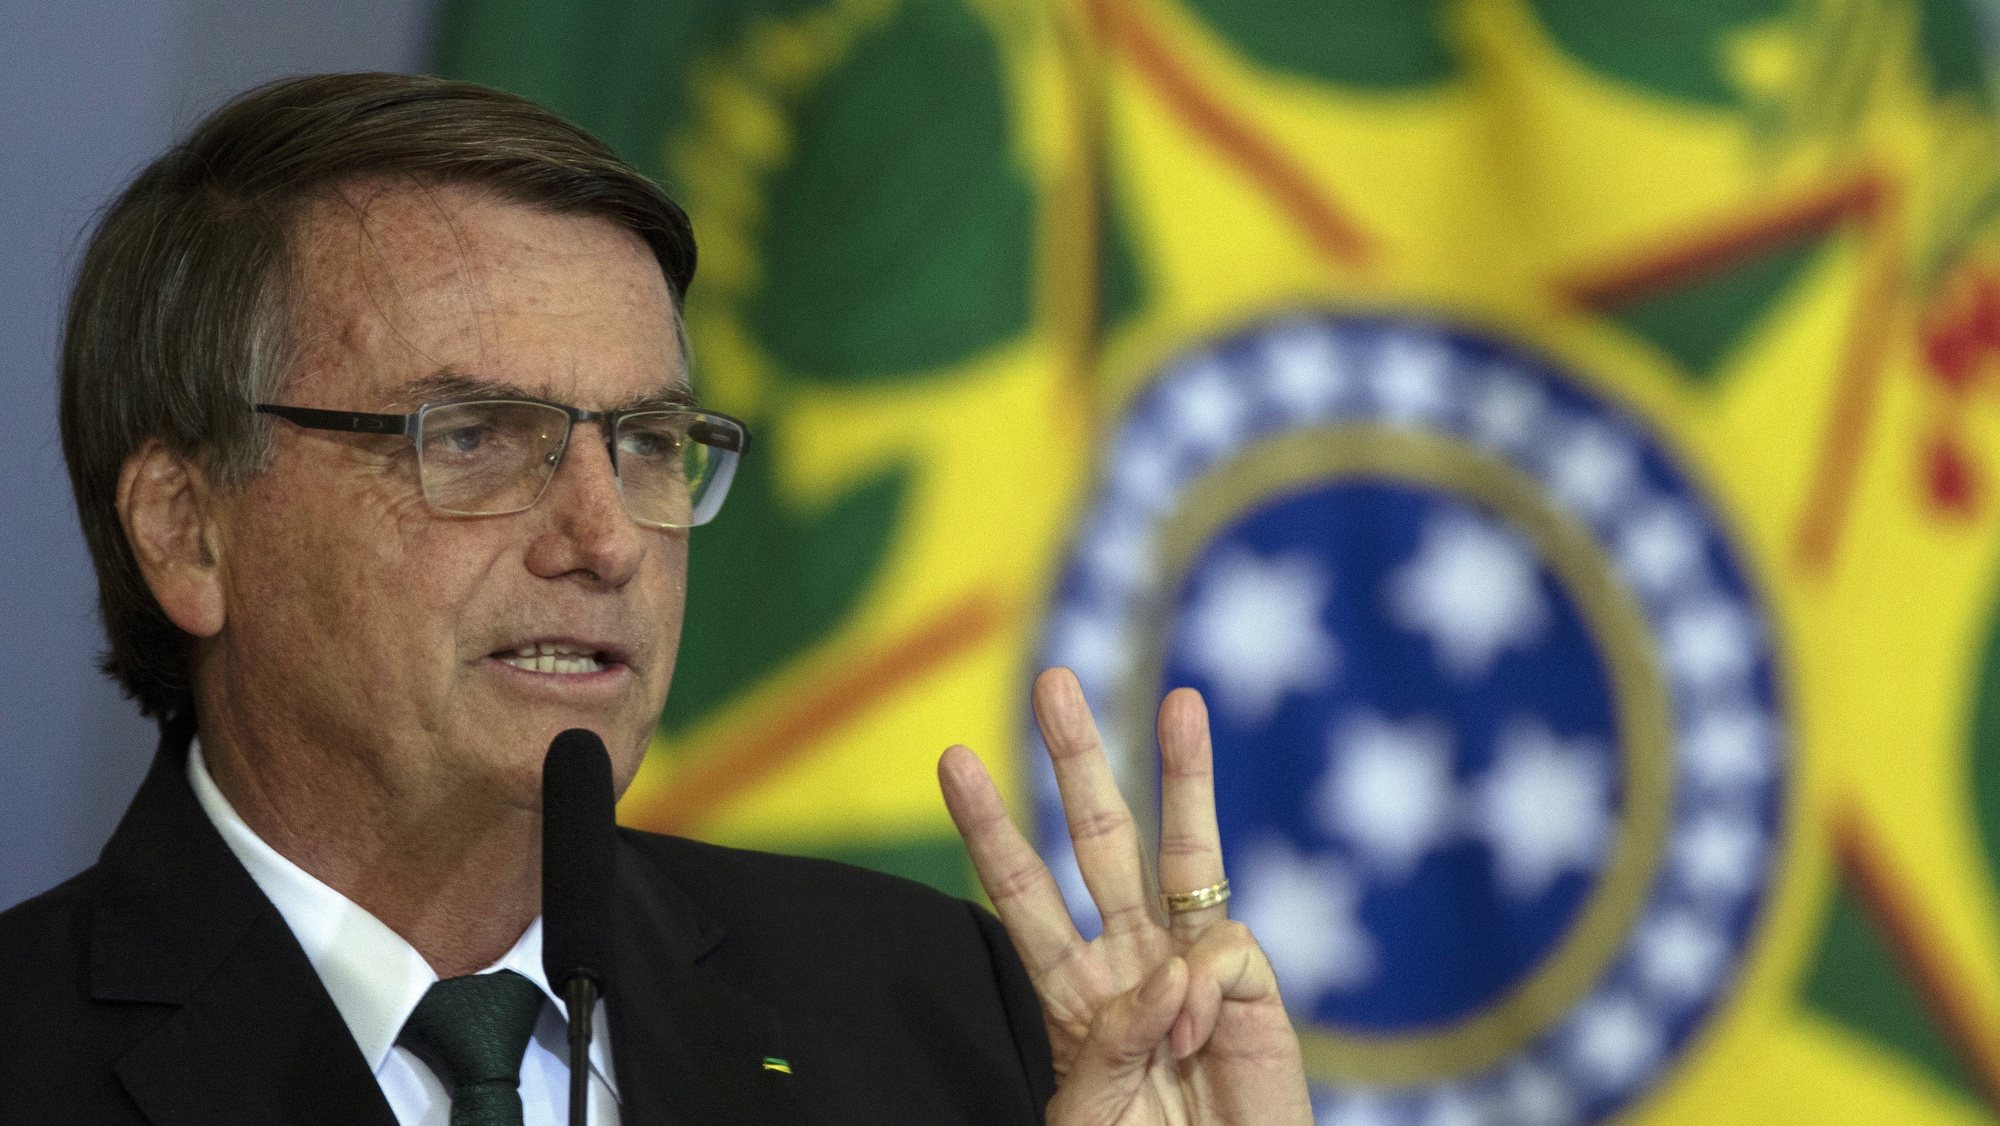 epa10024484 The President of Brazil Jair Bolsonaro gestures, while participating in an act of National Policy for the Recovery of Learning in Basic Education and the MECPlace - Innovation Ecosystem and Digital Educational Solutions, at the Palacio do Planalto in Brasilia, Brazil, 20 June 2022. EFE/ Joedson Alves  EPA/Joedson Alves